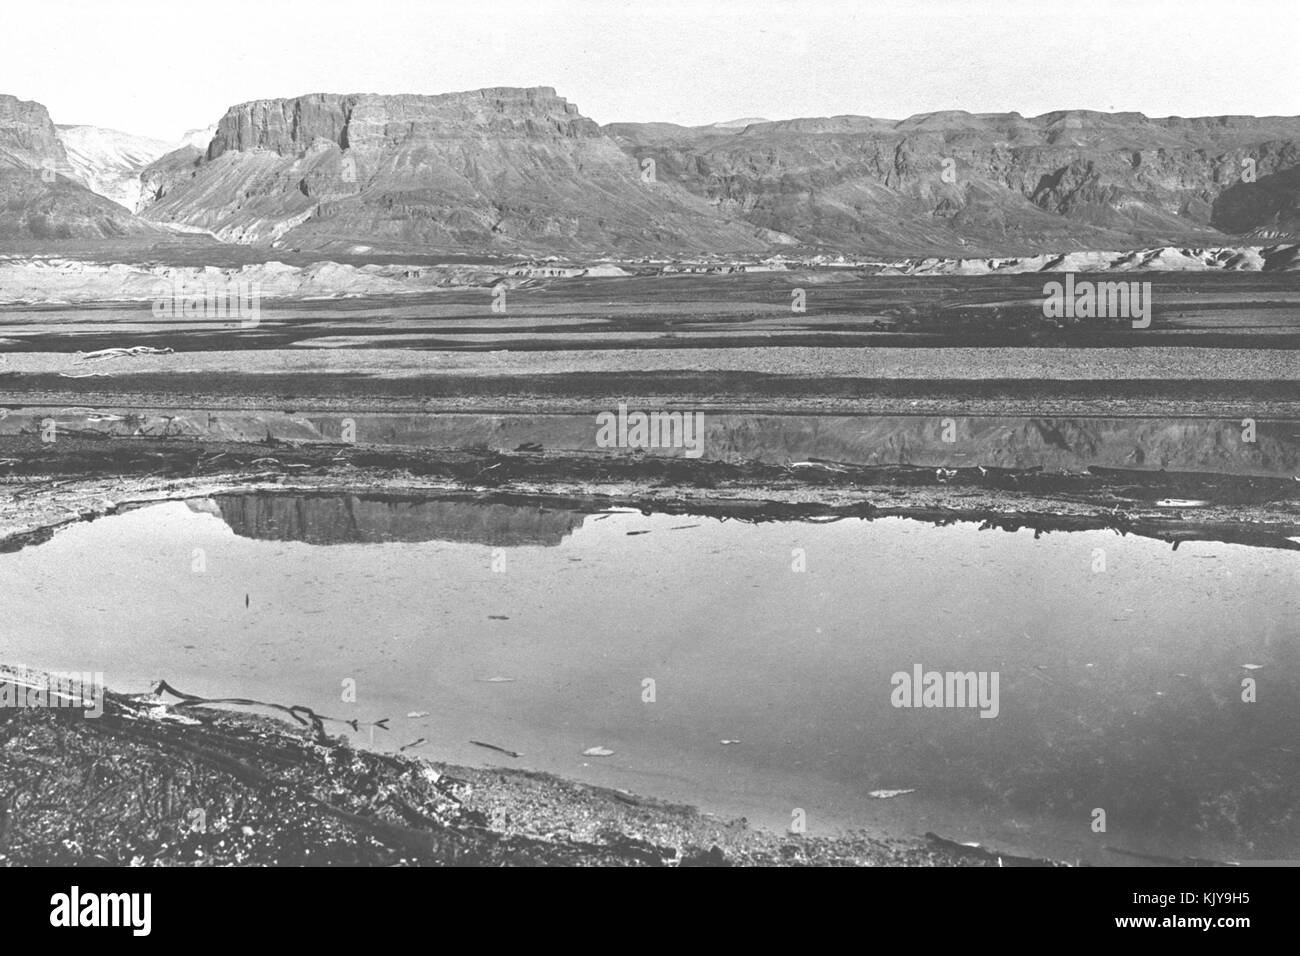 GENERAL VIEW OF MASADA, 1910 1920. COURTESY OF AMERICAN COLONY. Stock Photo